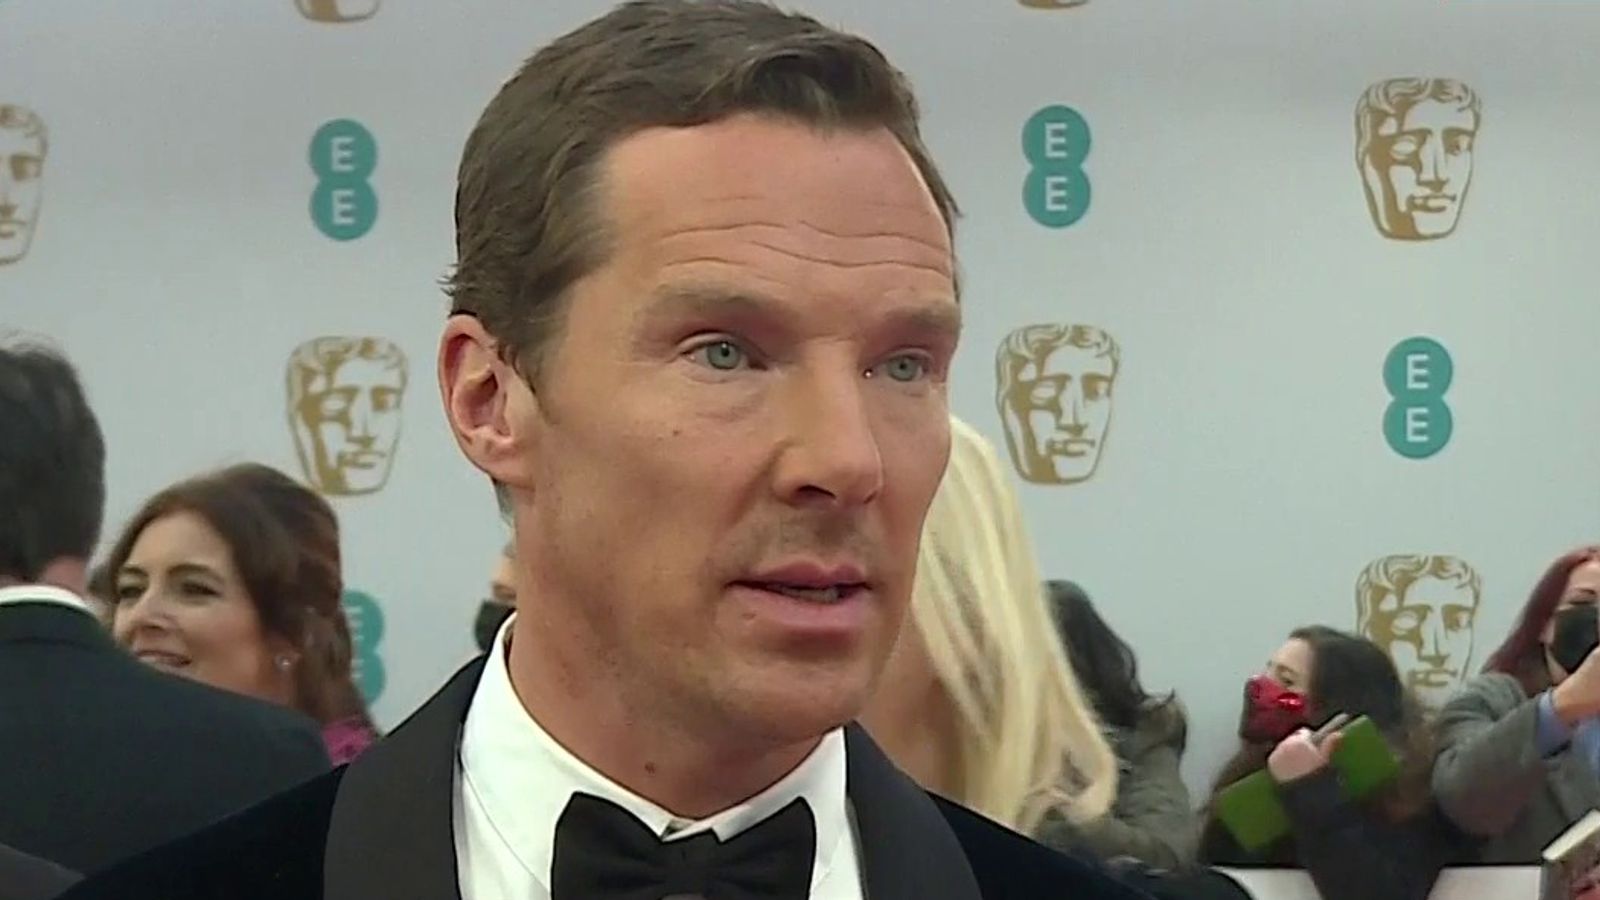 Benedict Cumberbatch: Barbados may hit star’s family with reparation claim over historical links to slave trade